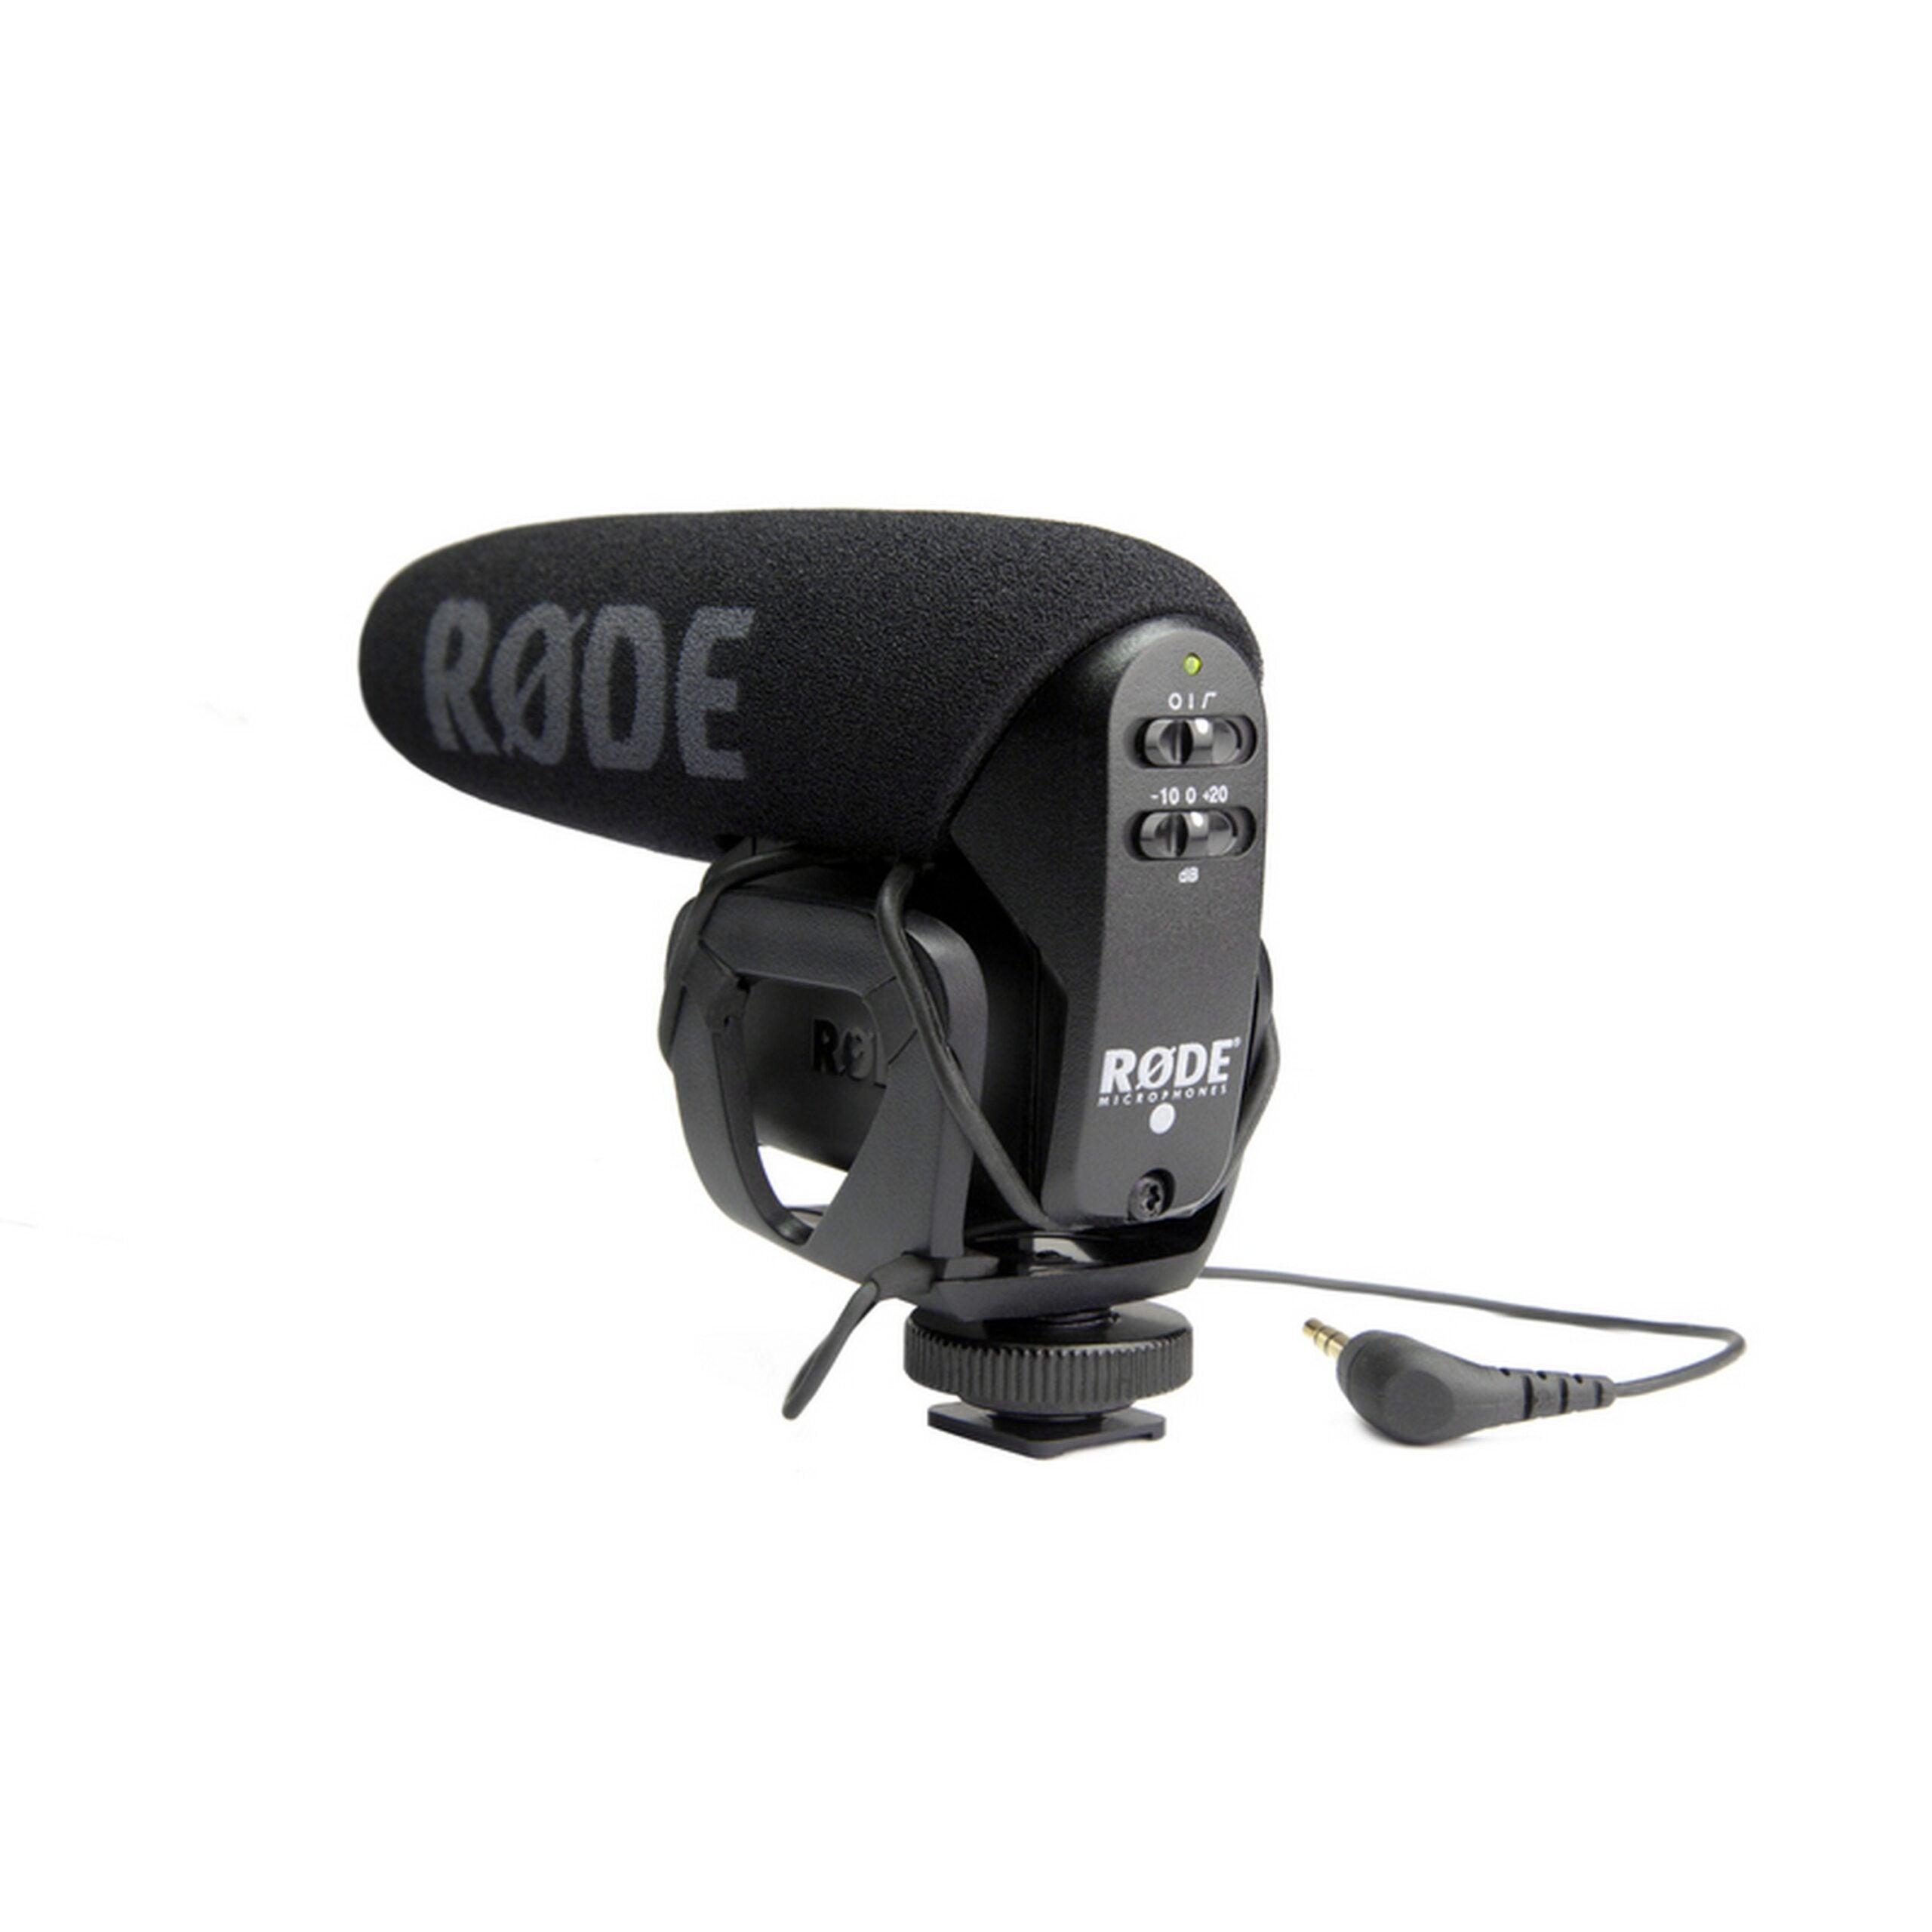 RODE VideoMic Pro Rycote Compact Directional On-Camera Microphone – AVLGEAR